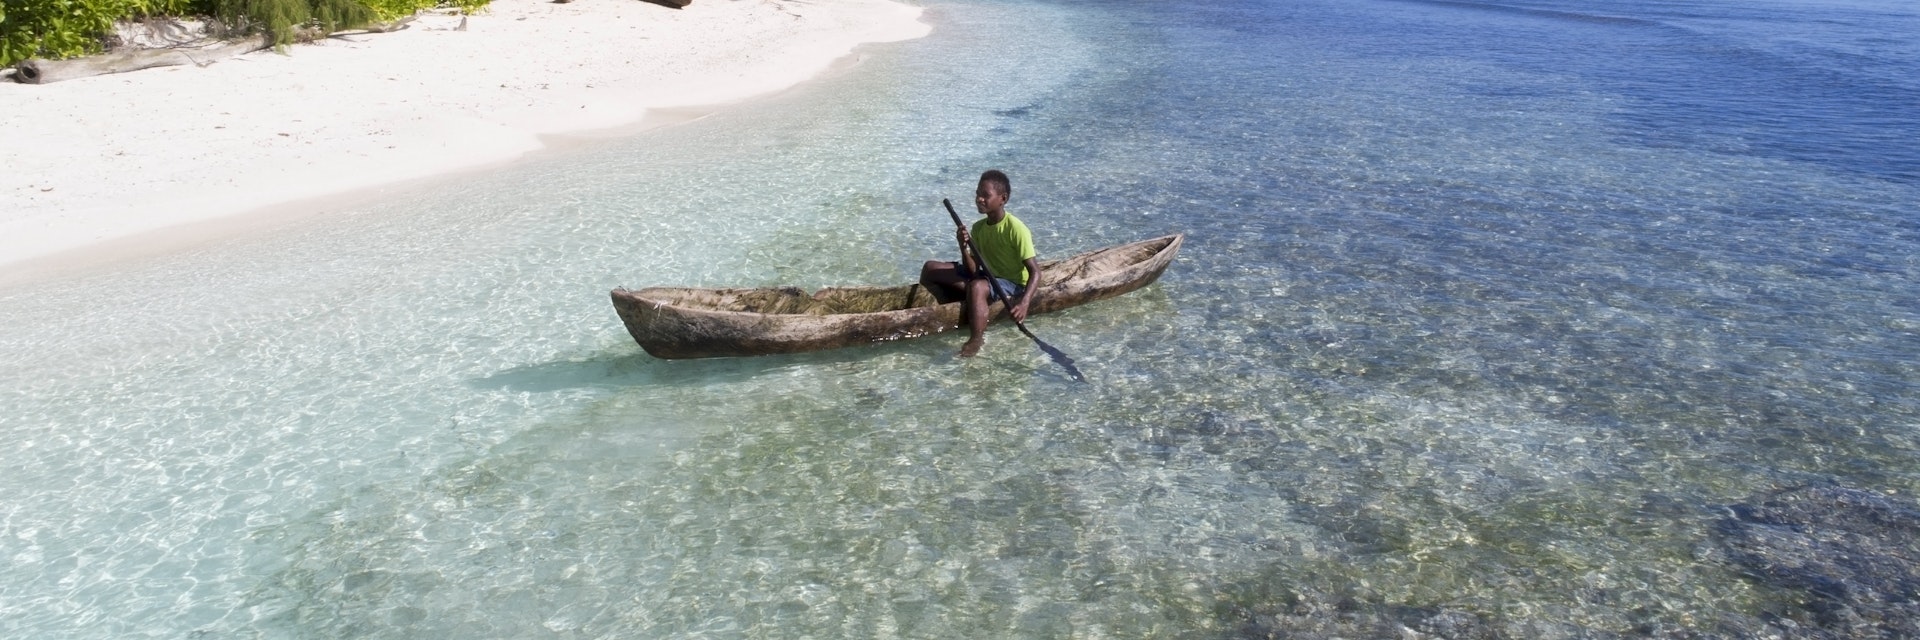 Child in a homemade wooden canoe in Papua New Guinea.